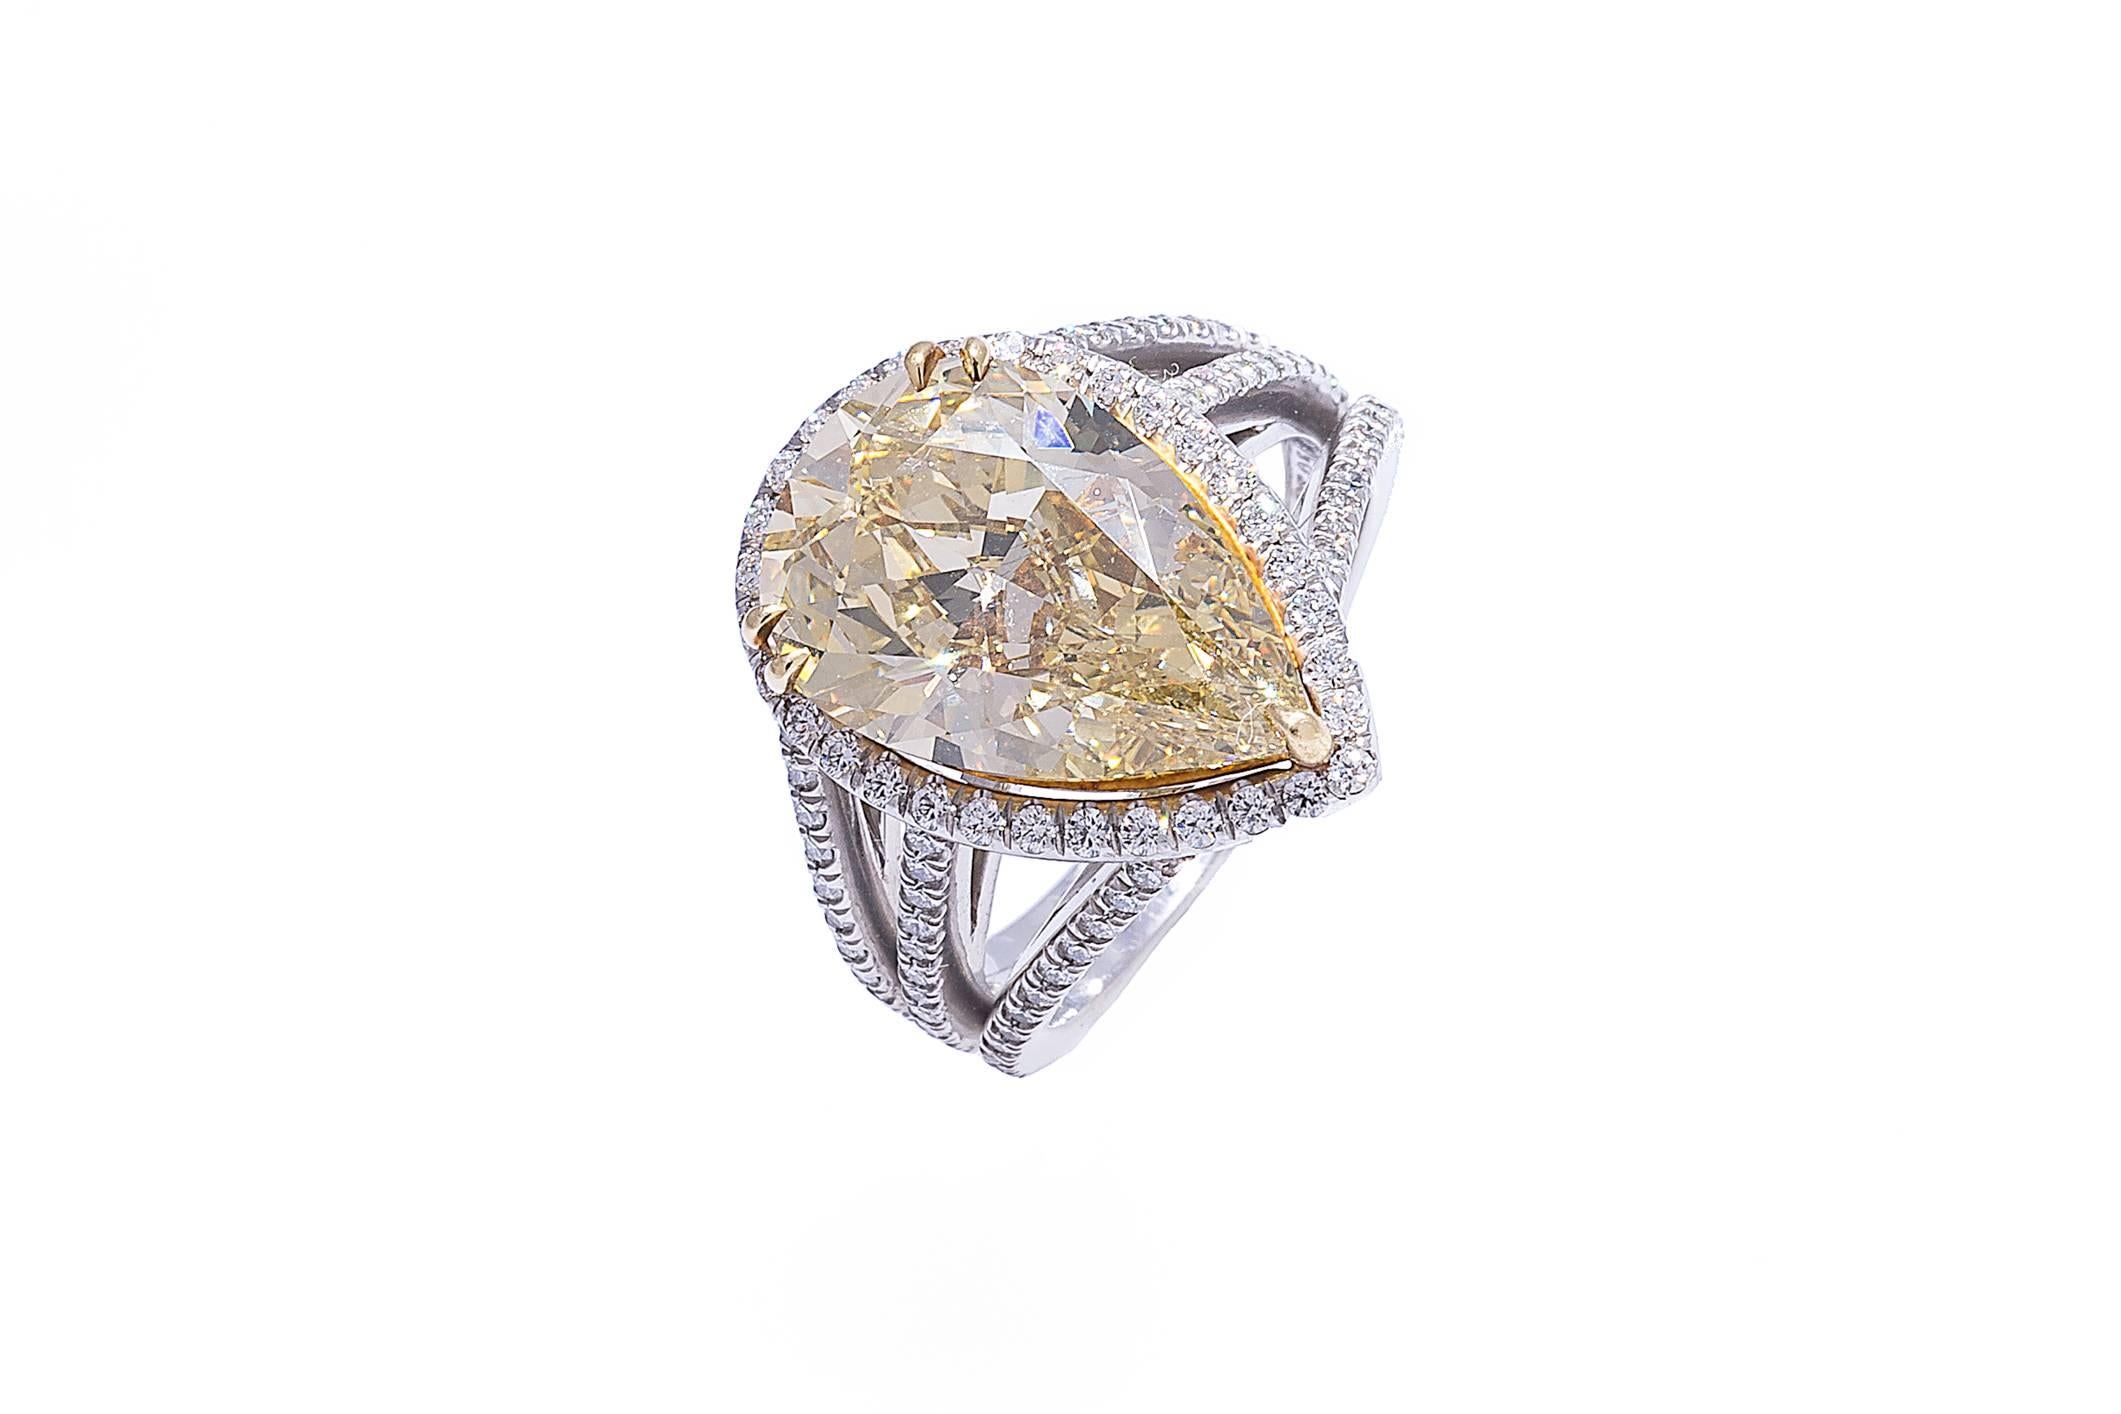 Platinum diamond ring containing a pear shape brilliant cut brownish yellow diamond weighing 5.62 carats. The pear shape diamond is set in 18K yellow prongs. The yellow diamond comes with a GIA Grading Report. The custom made platinum mounting